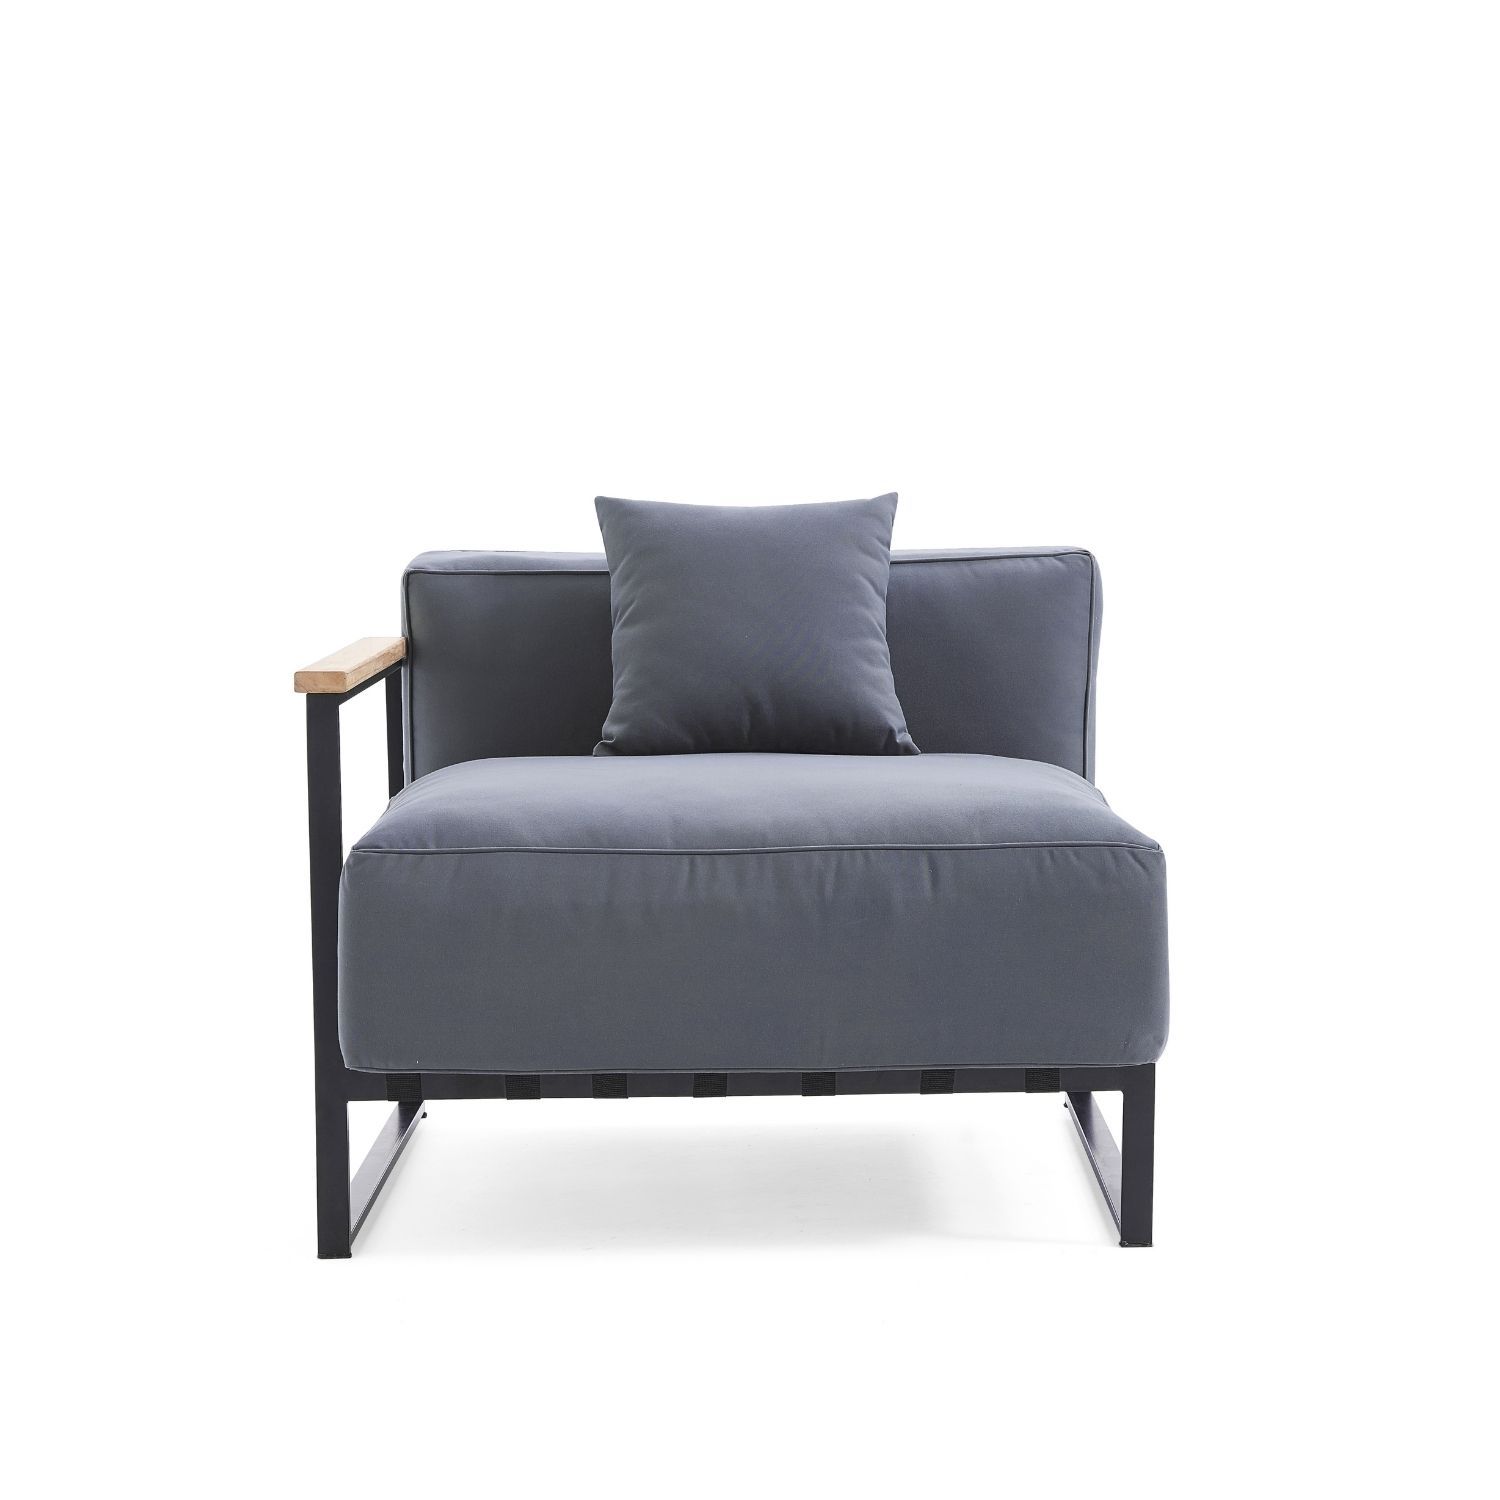 Abeo End Seat Sofa Zomanity Facing Left 